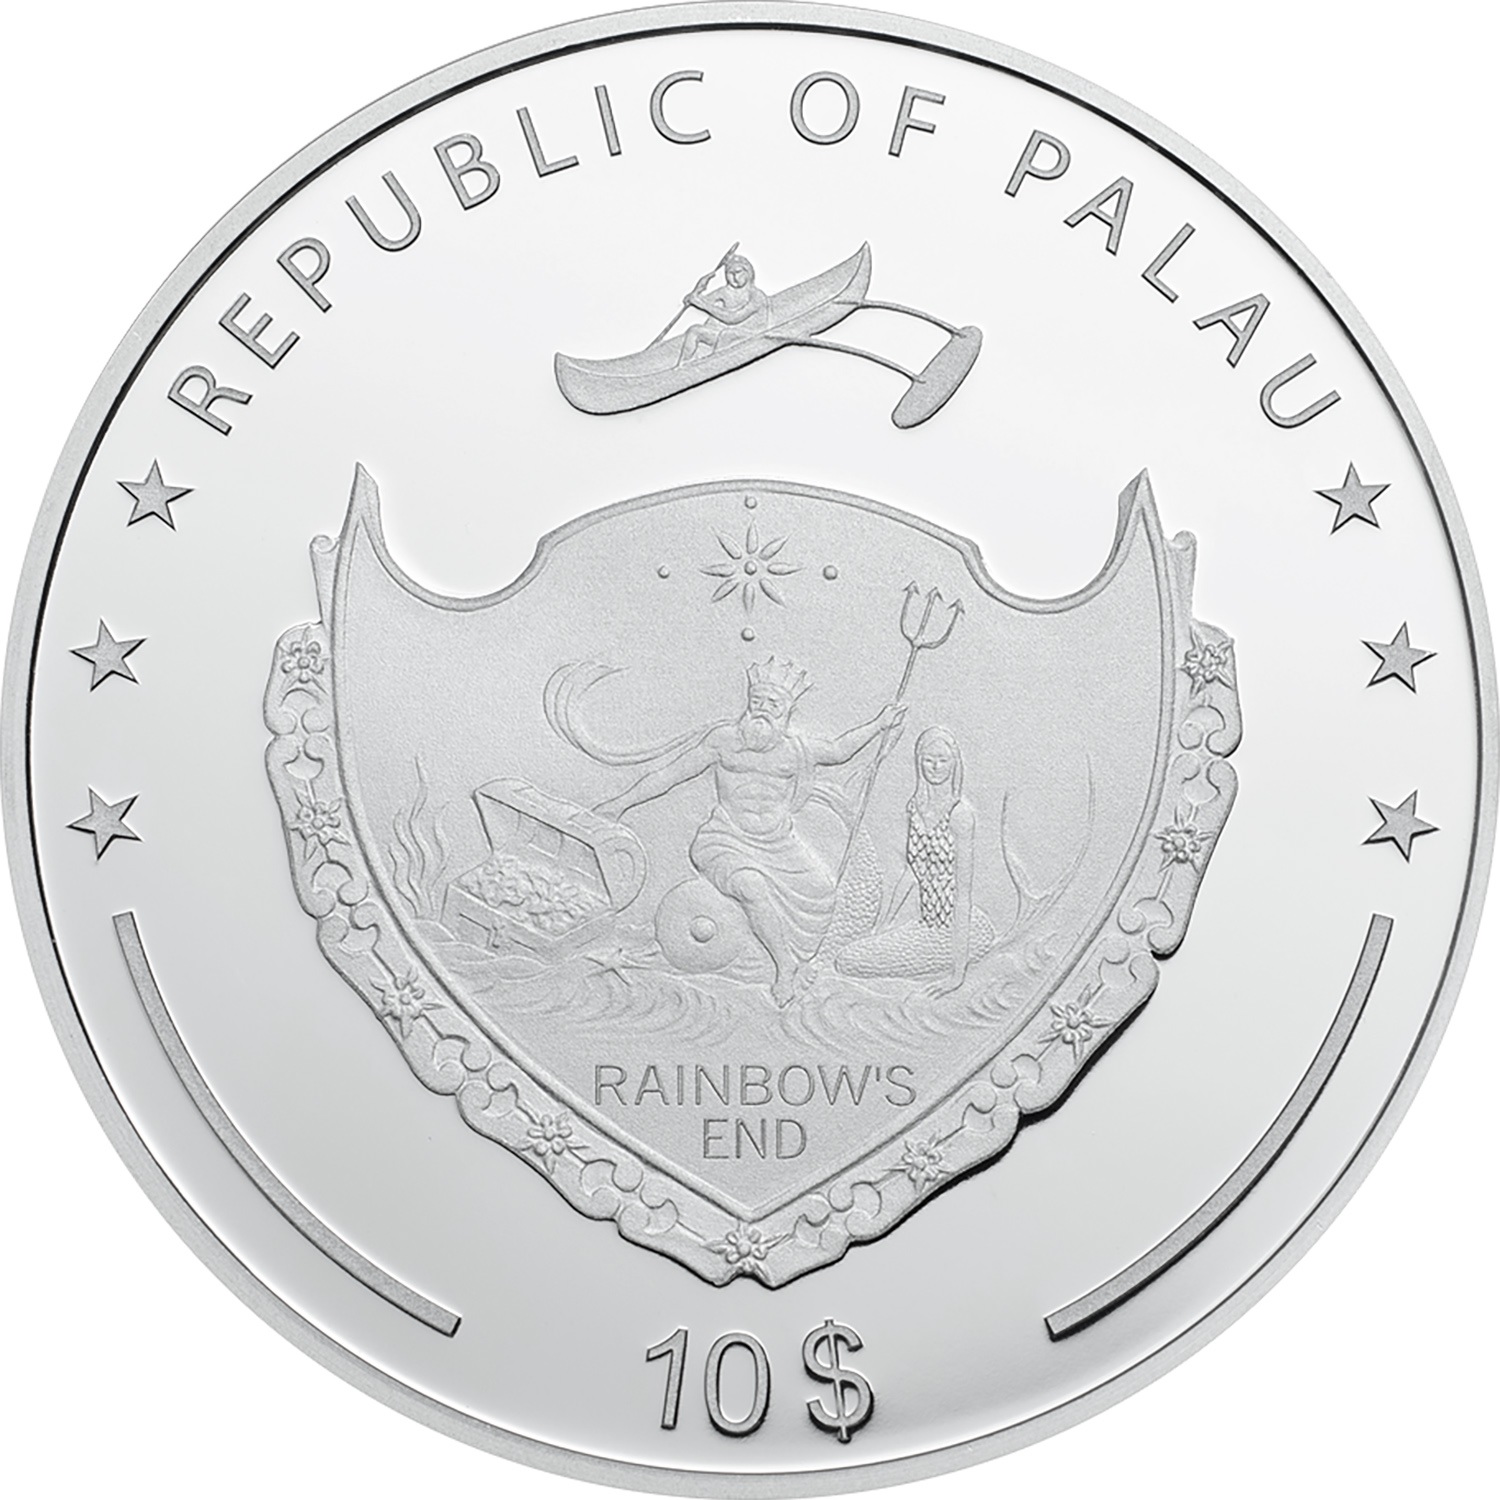 (W168.1.10.D.2017.28048) Palau 10 Dollars Pink Rose 2017 - Proof silver Obverse (zoom)